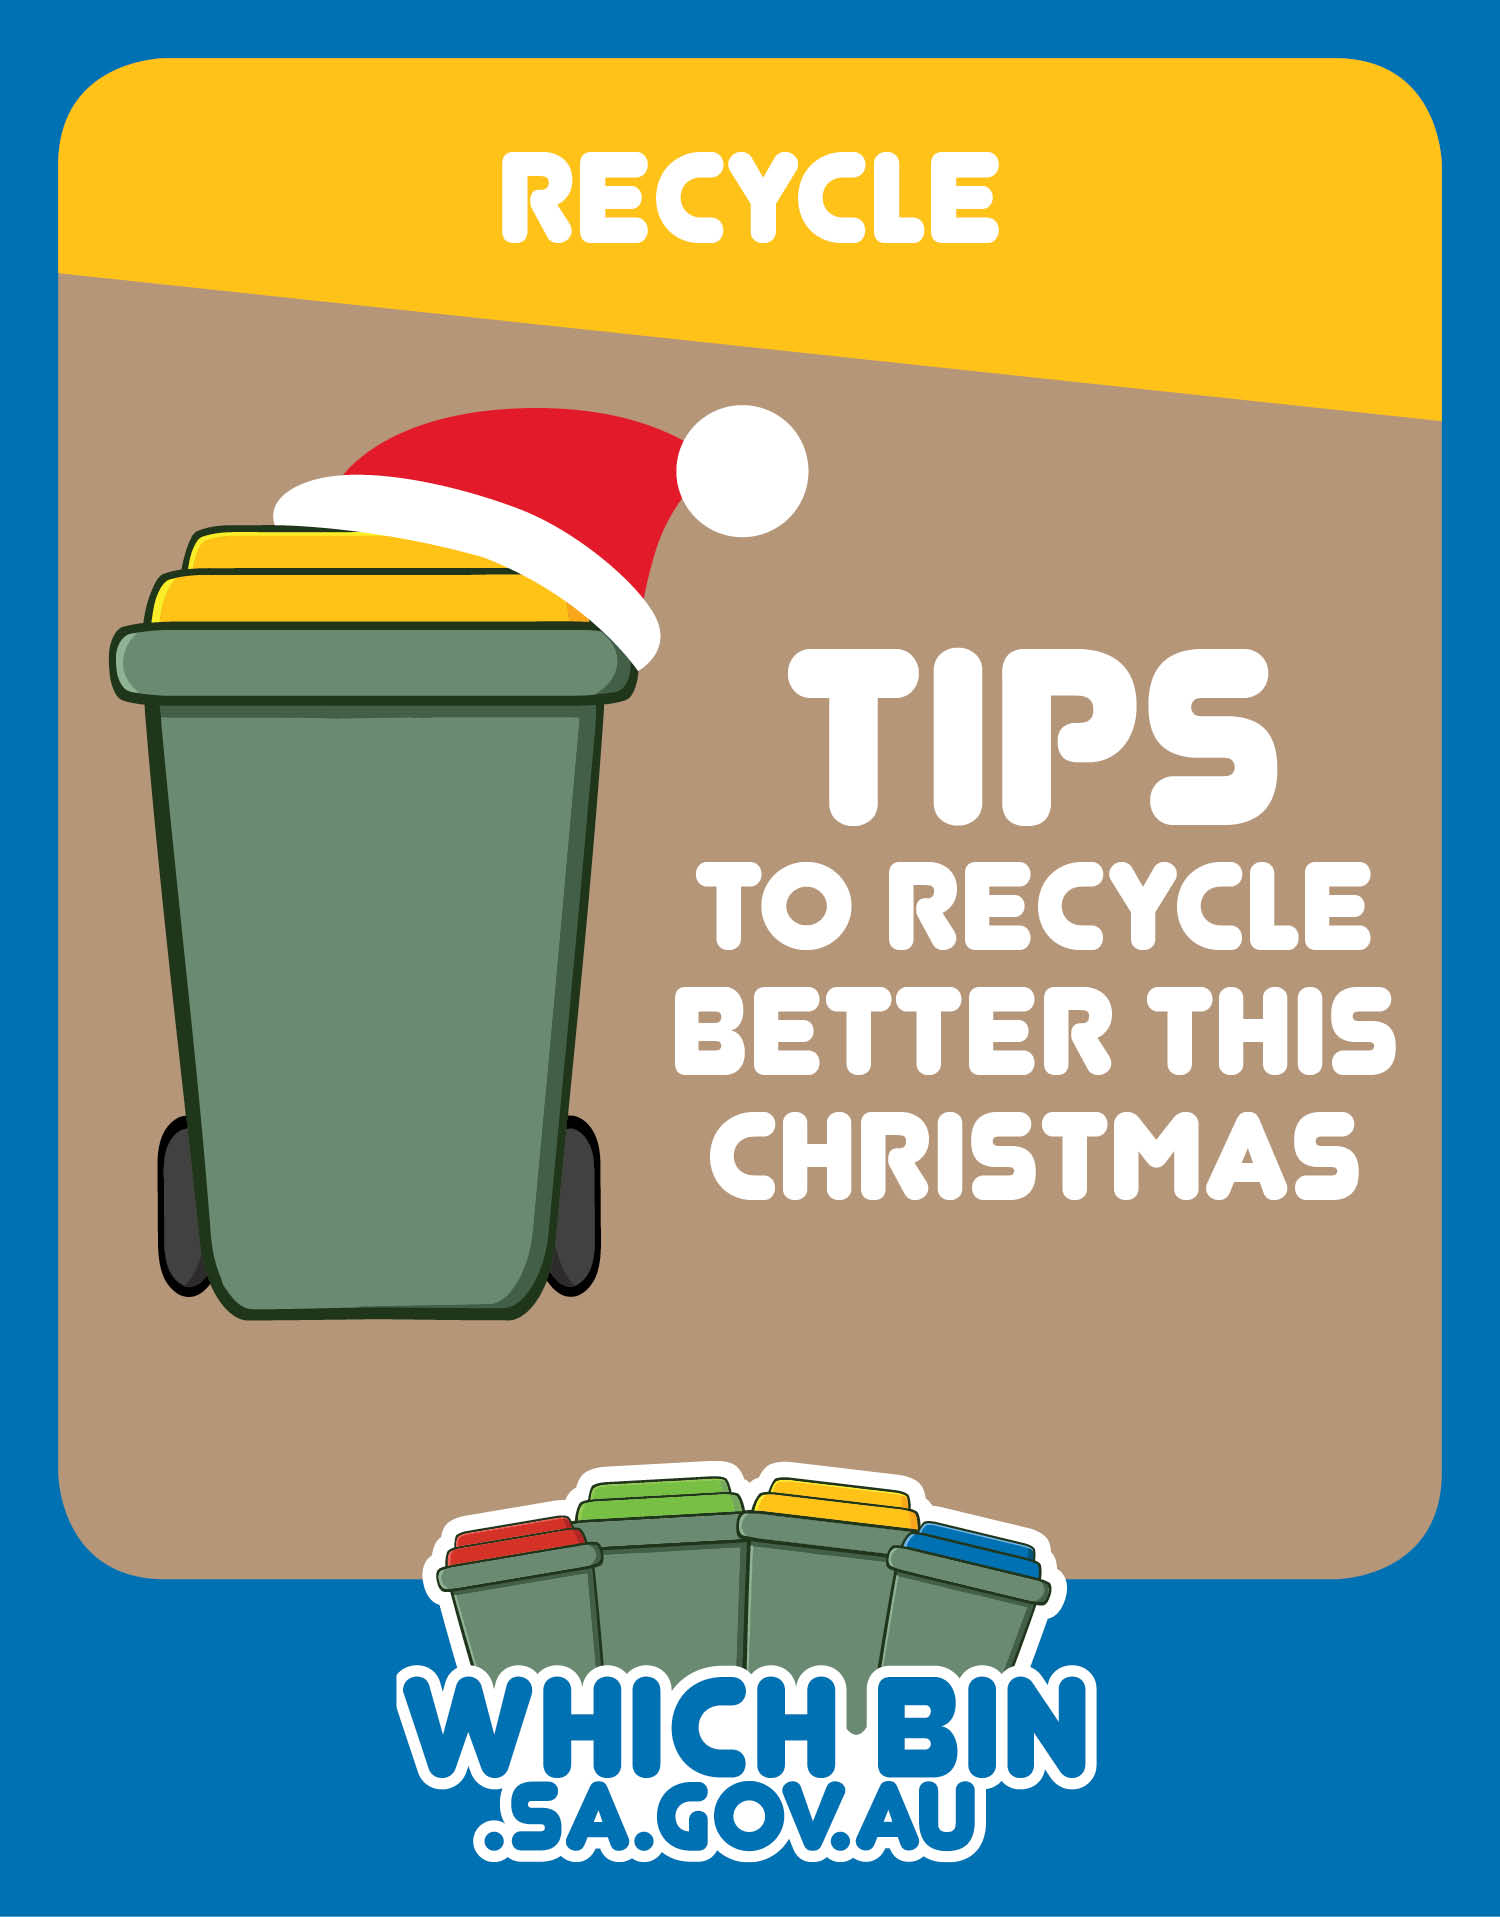 Remember to recycle it! Most gift, drink and food packaging can be recycled.